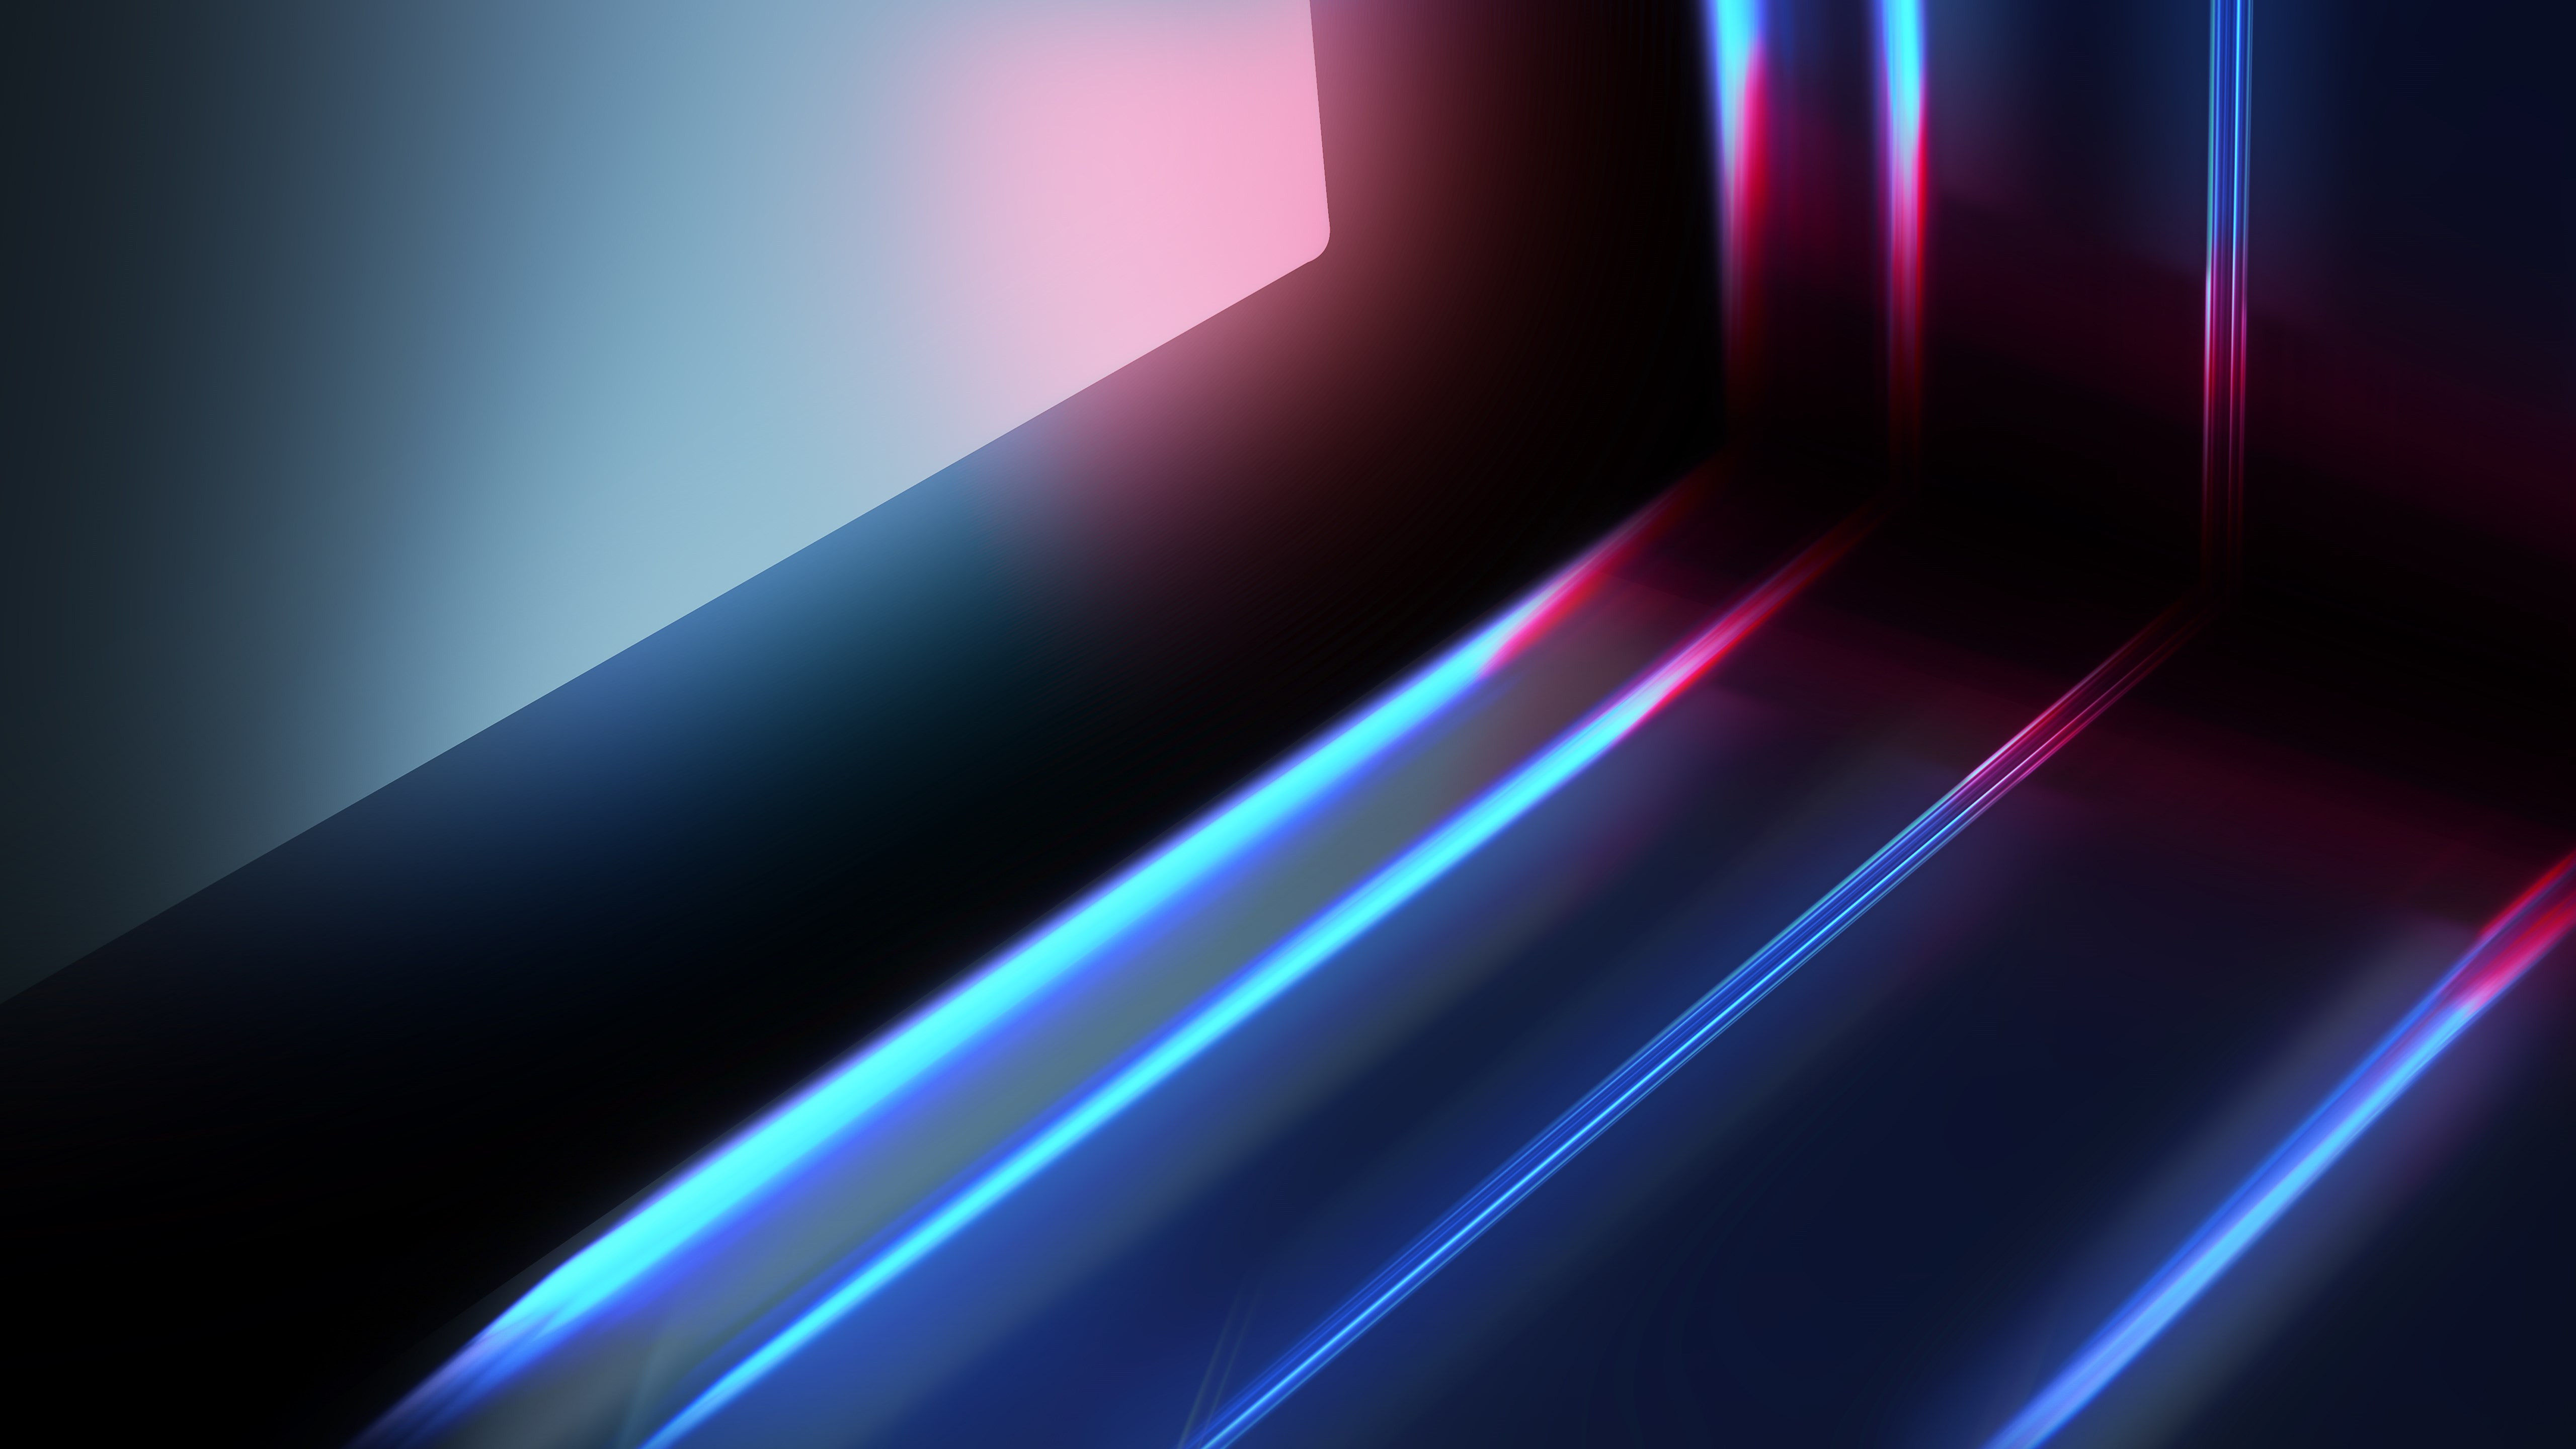 Abstract blue red lights wallpaper 5120x2880